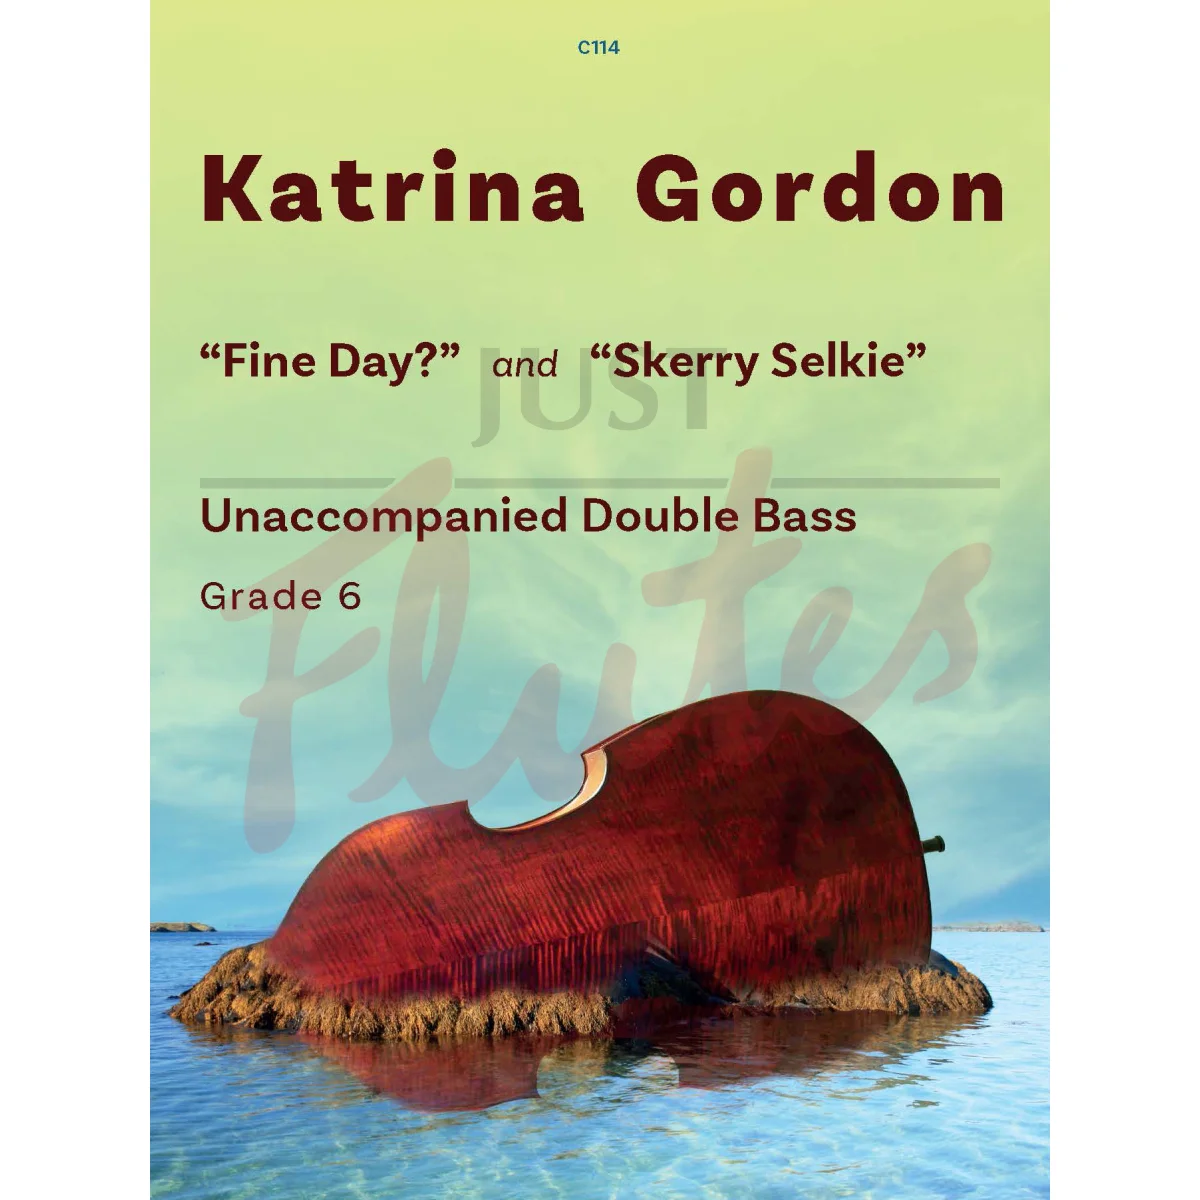 &quot;Fine Day?&quot; and &quot;Skerry Selkie&quot; for Double Bass